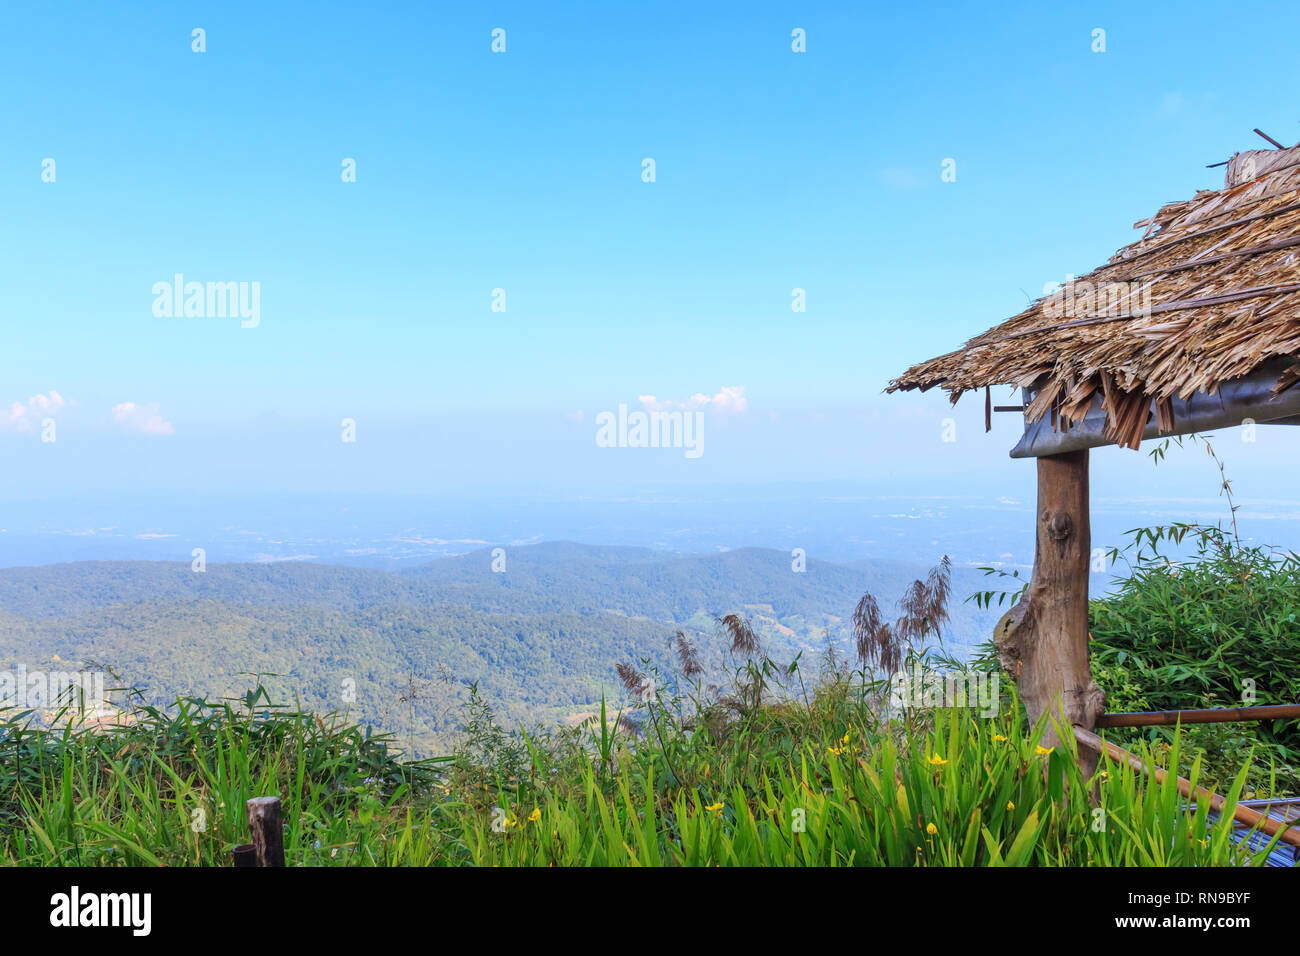 The hut in Monjam, Chiang Mai, Thailand. Stock Photo